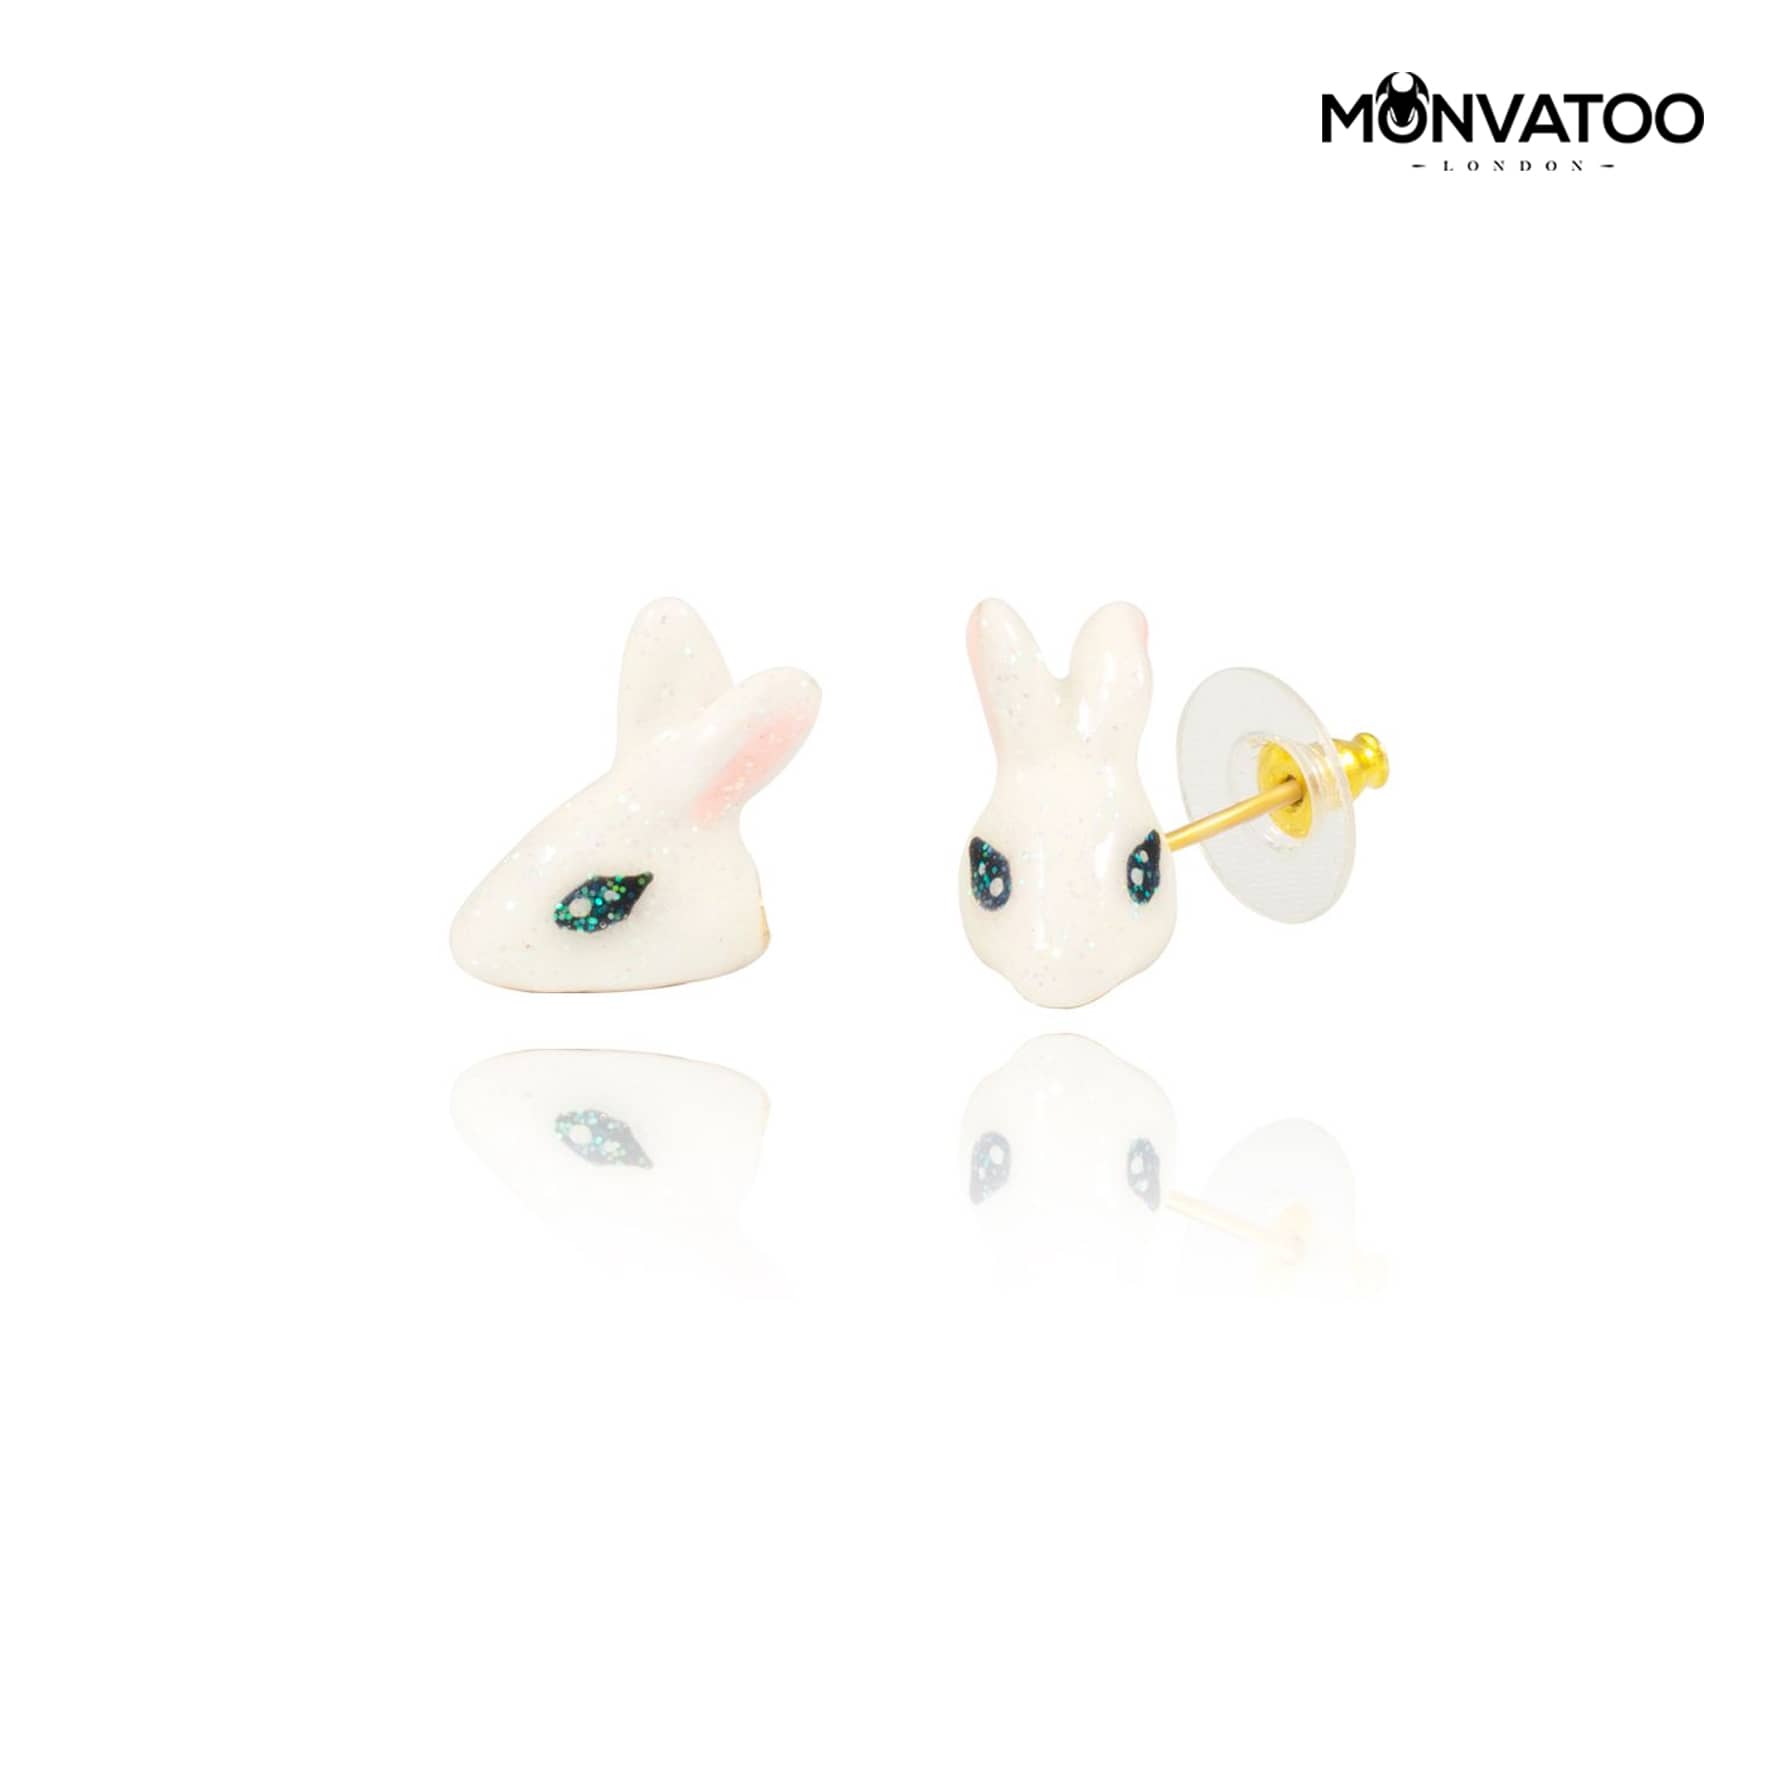 SweetHeart Bunny Earrings by MONVATOO London - front and side views